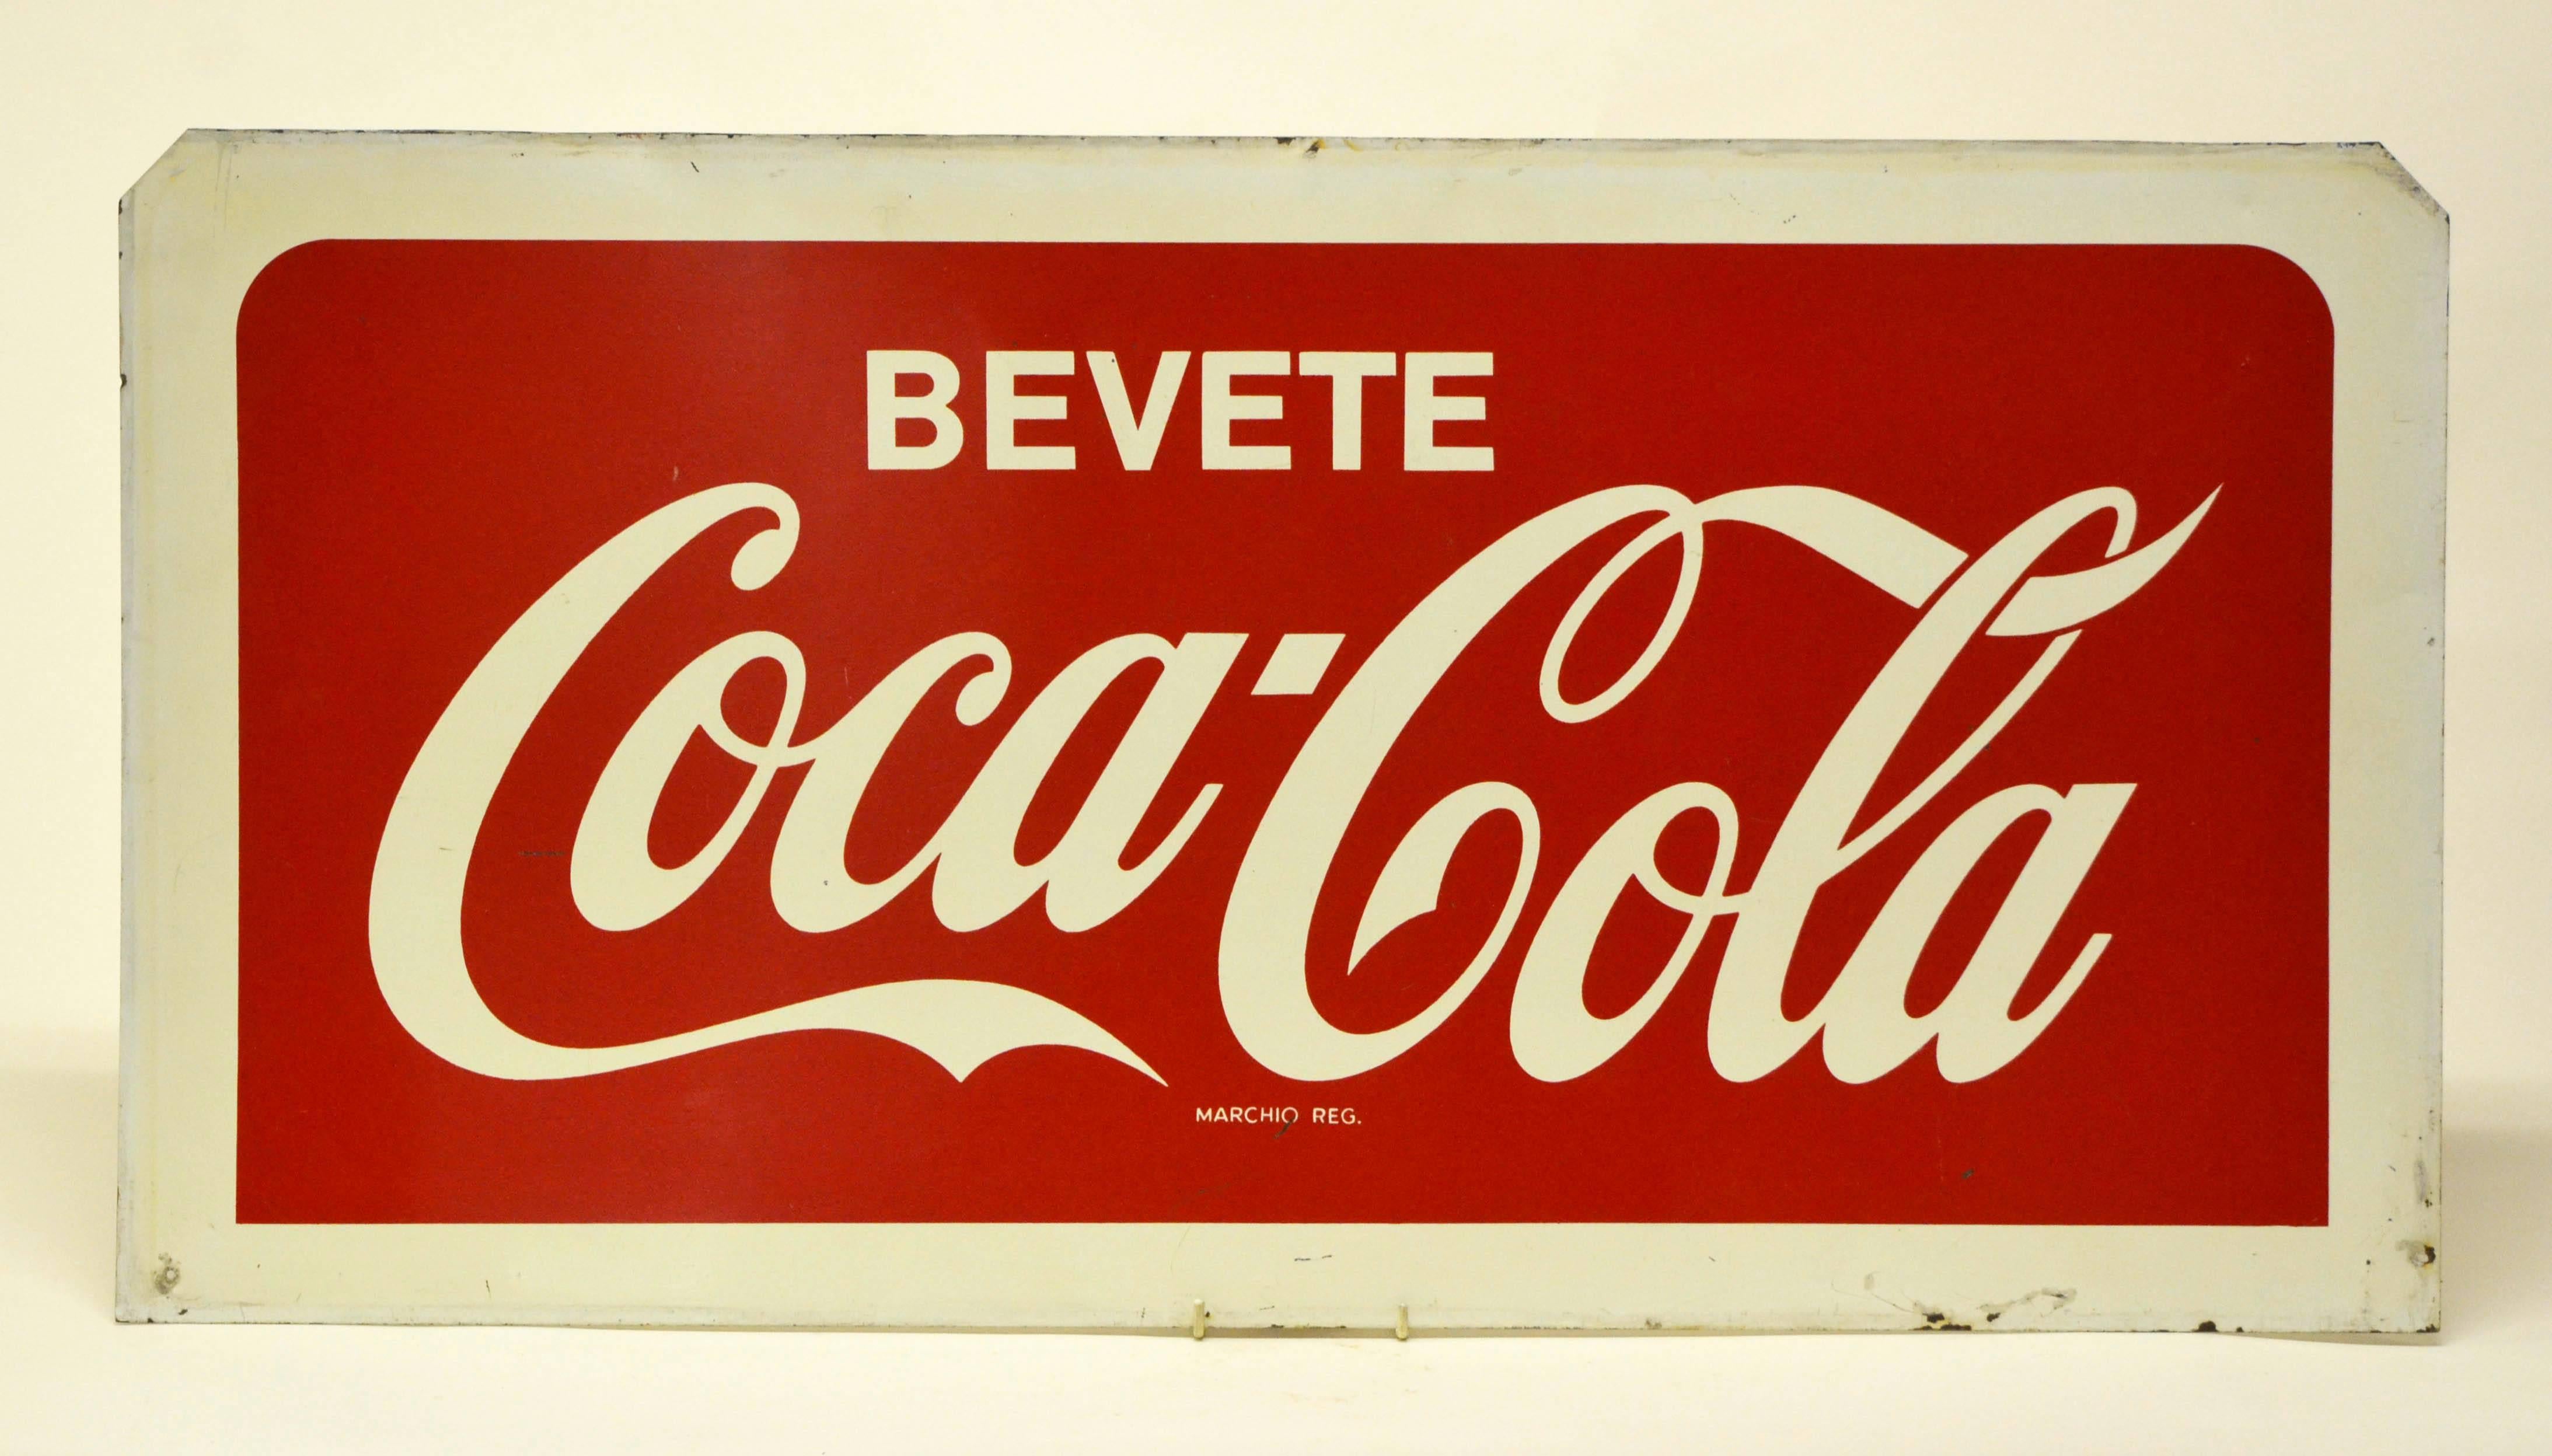 Metal screen printed Coca-Cola double sided sign produced in Italy. White 